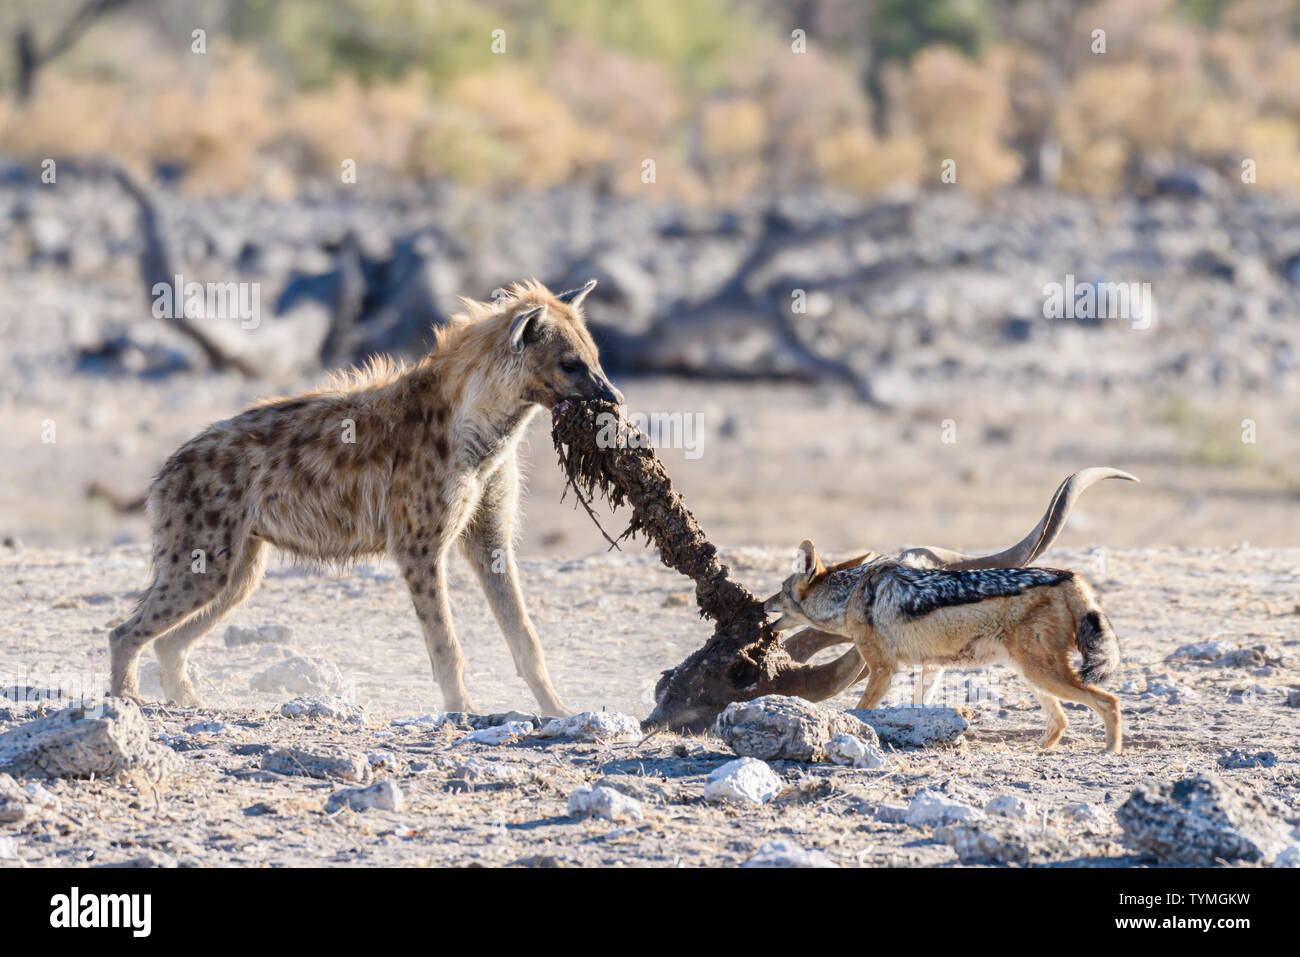 A black-backed jackal tries to steal a piece of meat from a spotted hyena as it drags the spine, skull and horns of a large male kudu.  Etosha Nationa Stock Photo